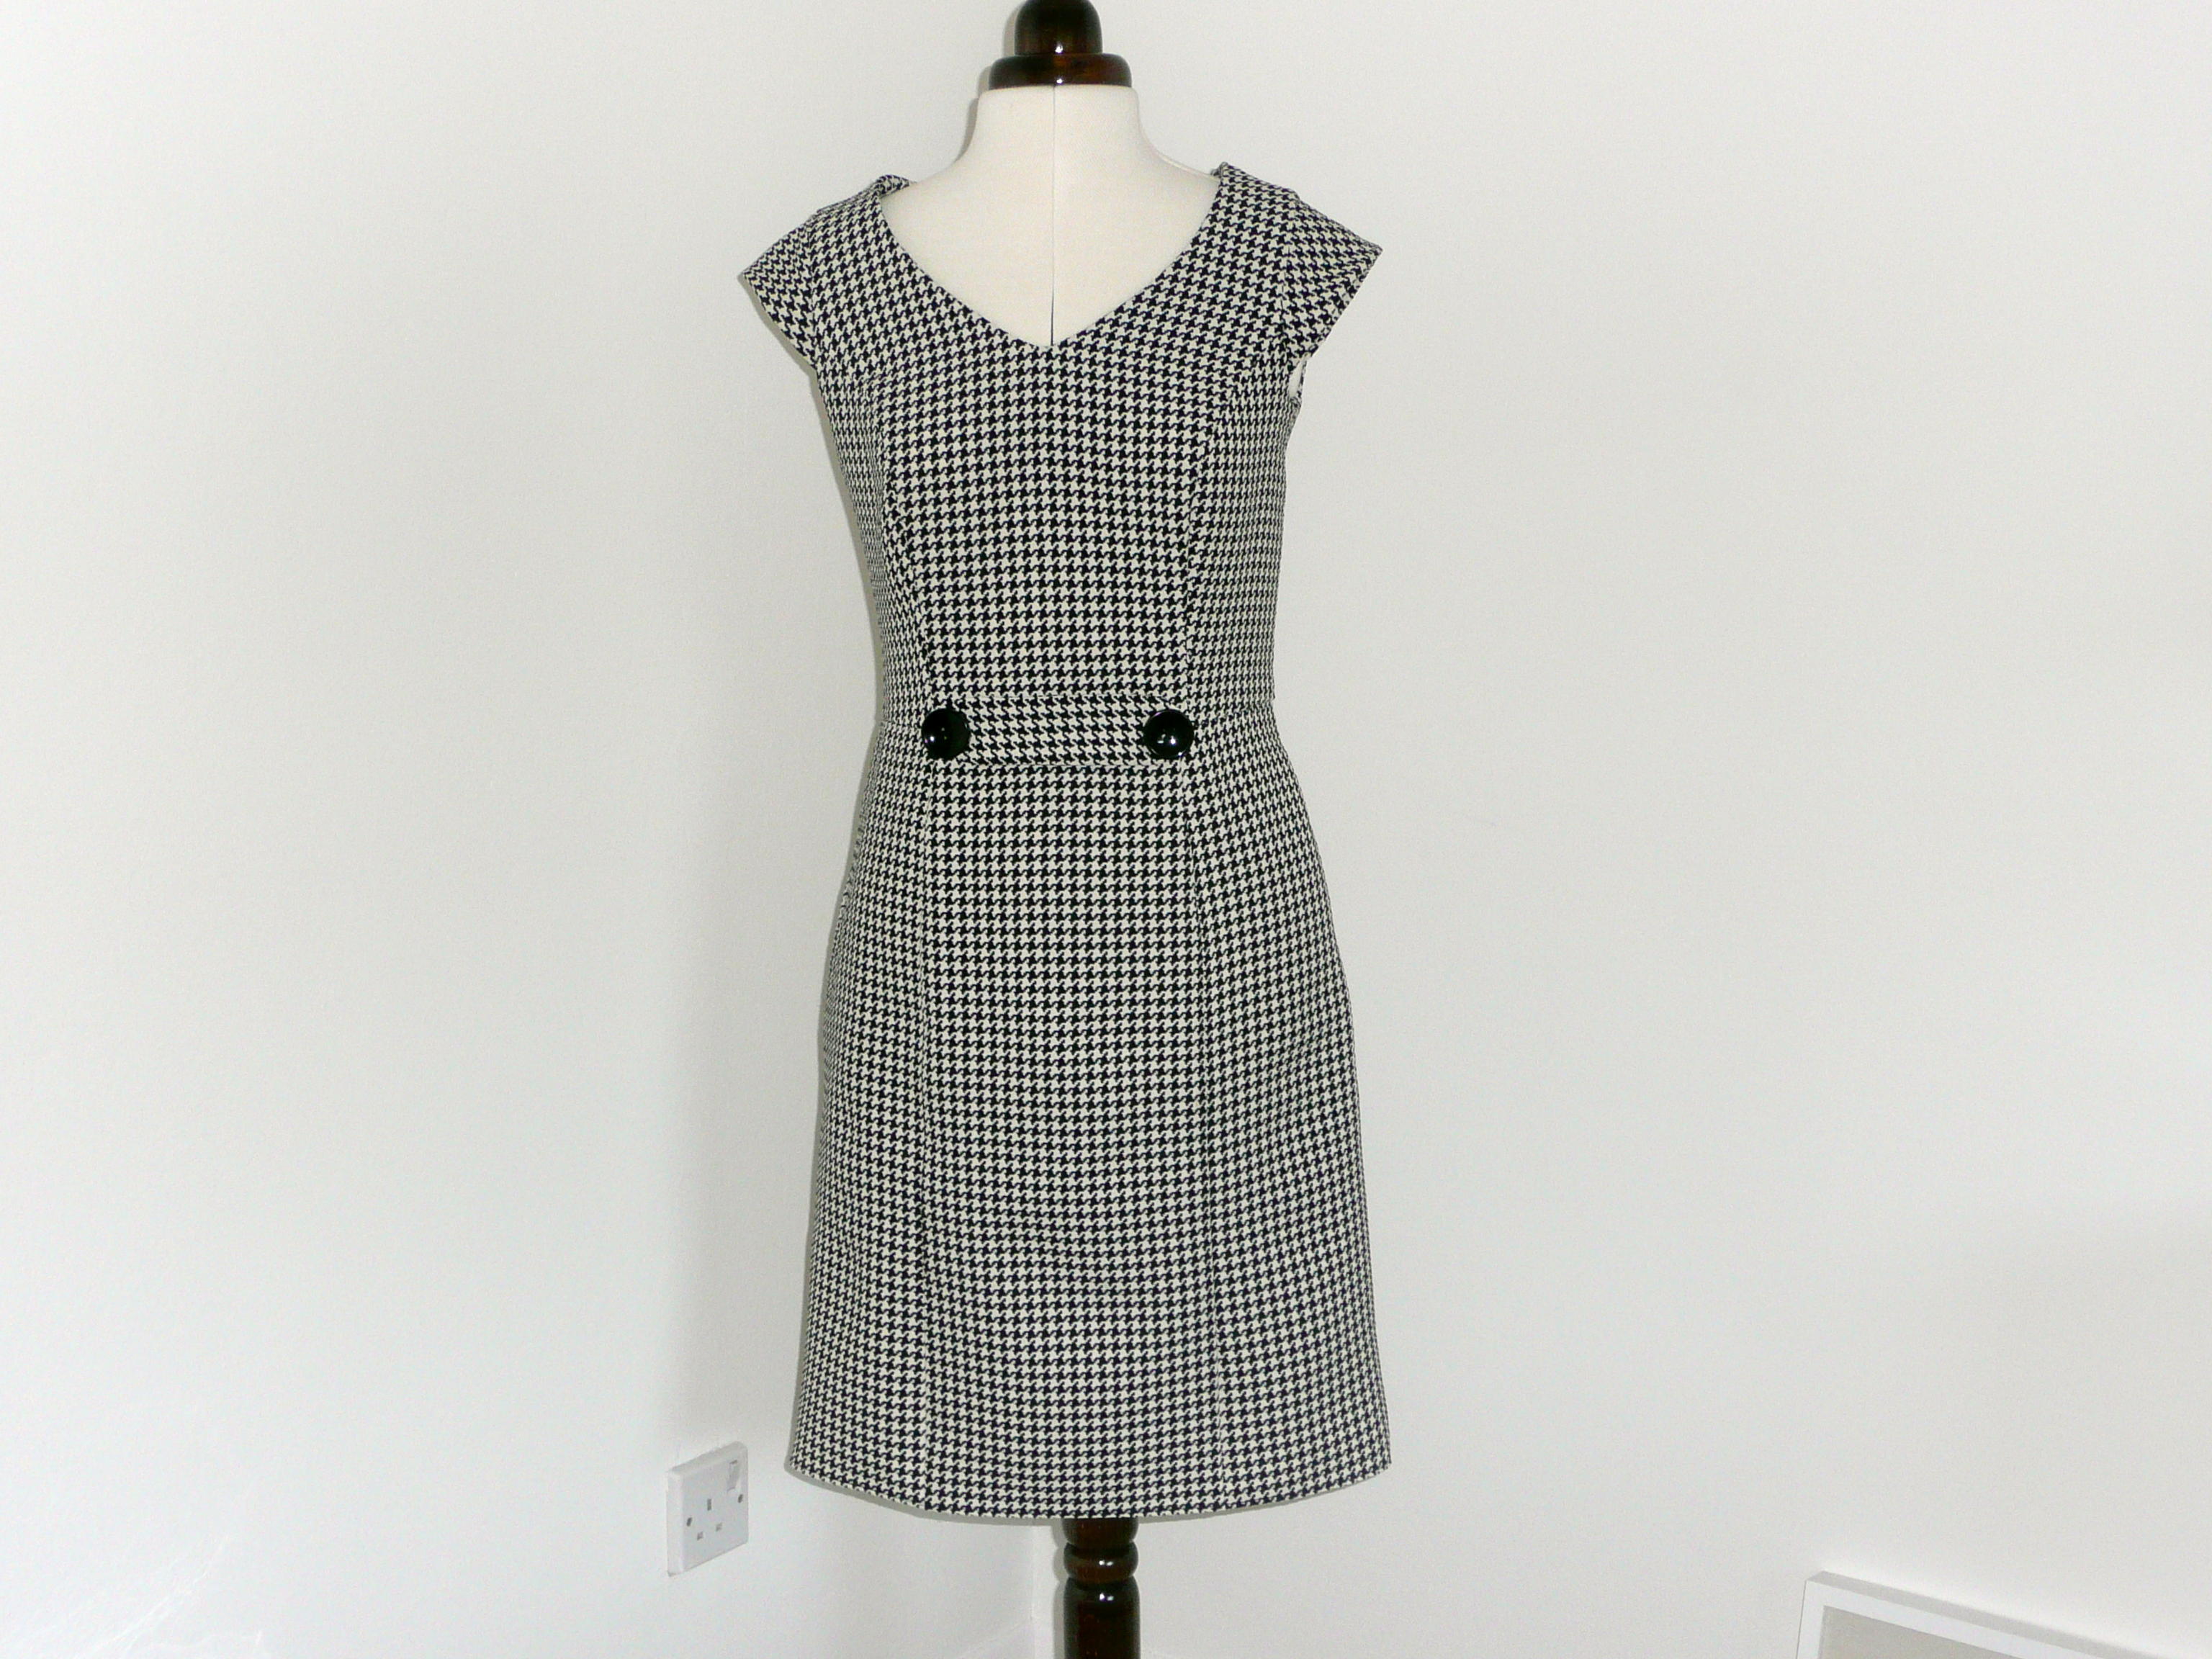 Dogtooth Dress – Sewing Projects | BurdaStyle.com